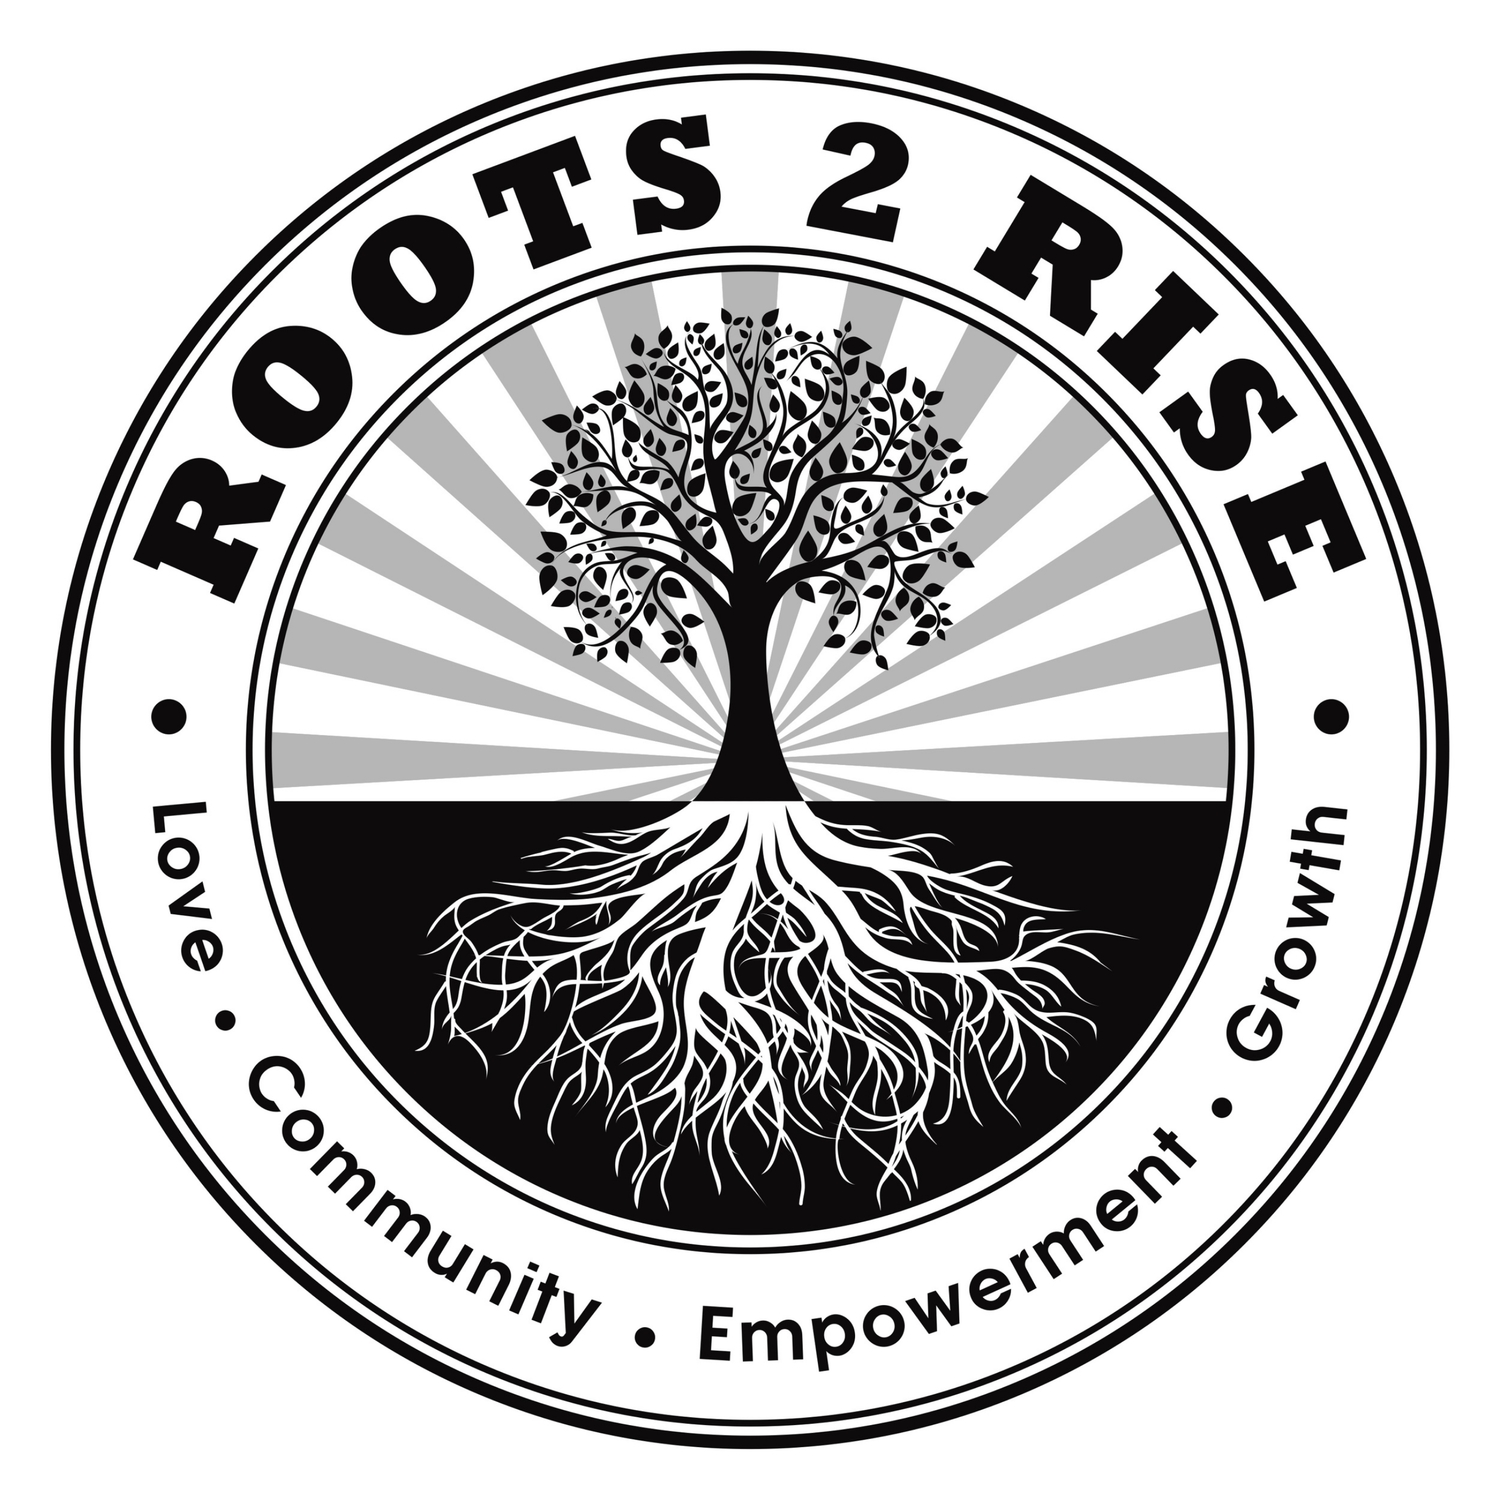 Roots2Rise